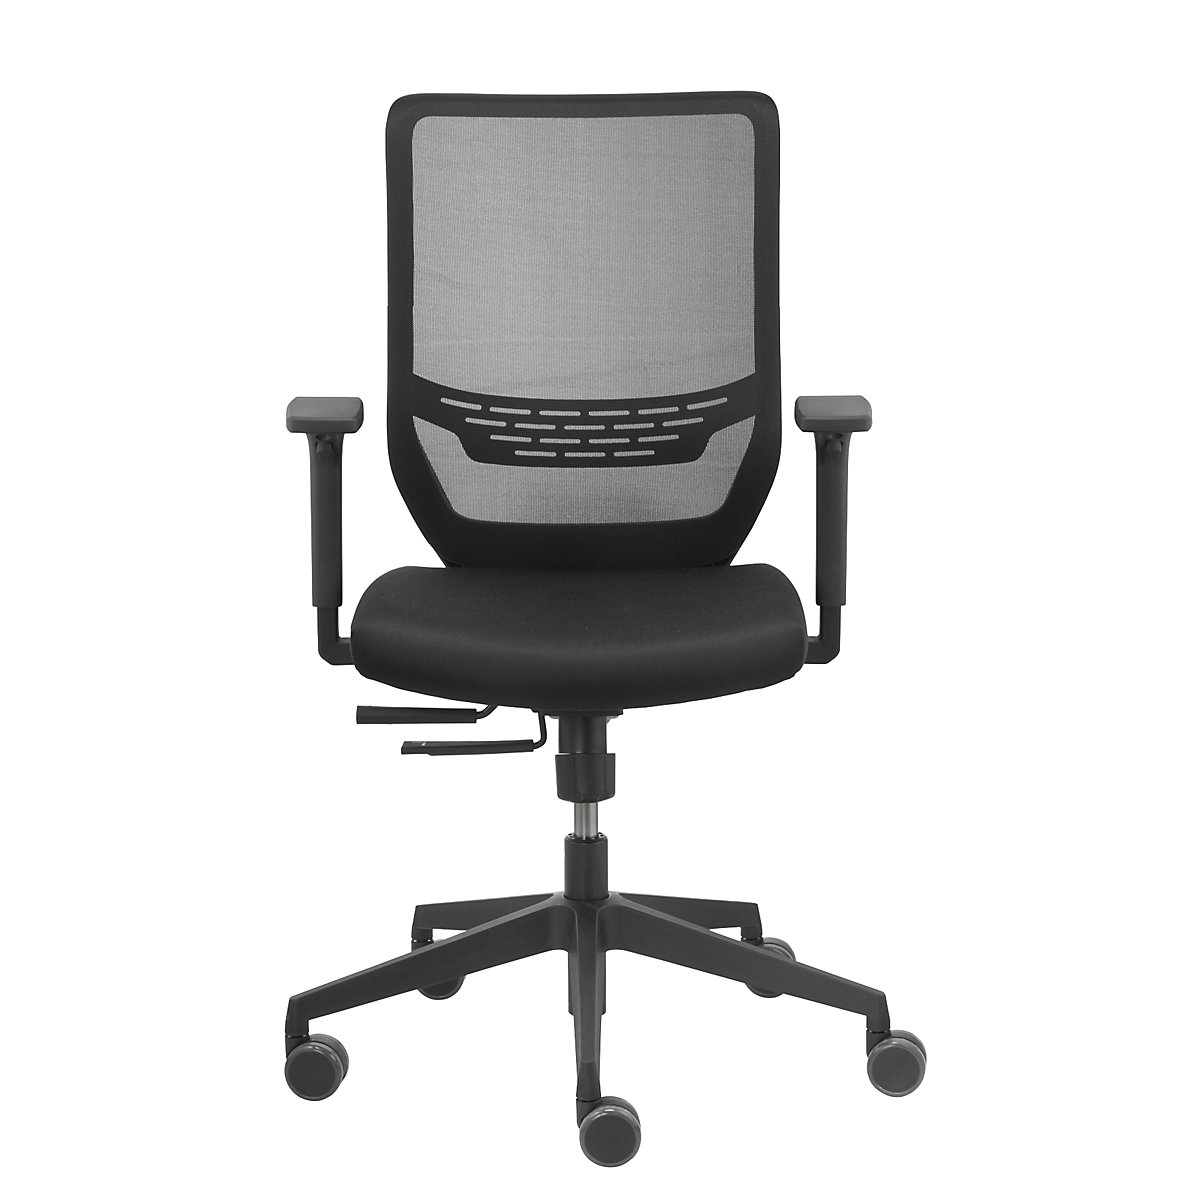 TO-SYNC office swivel chair – TrendOffice